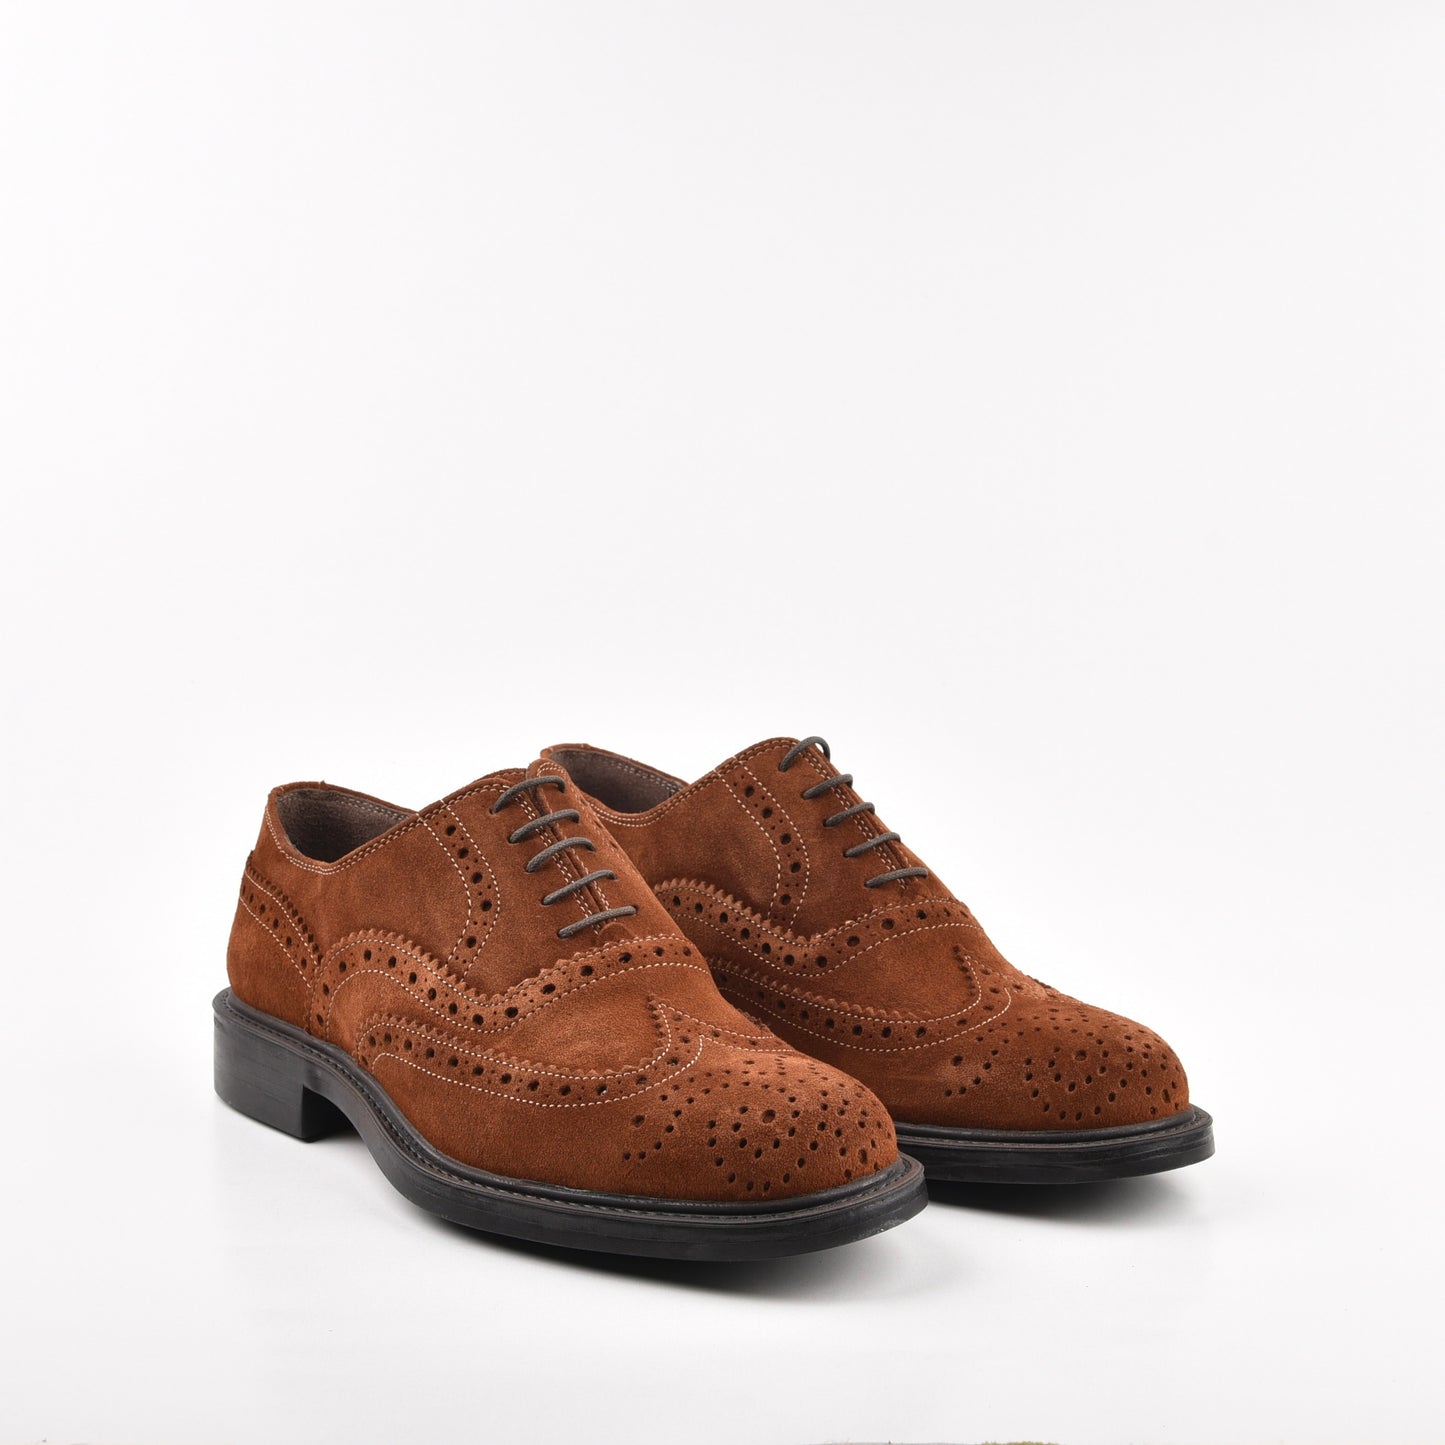 Shalapi Italian Oxford lace up for men in suede Camel